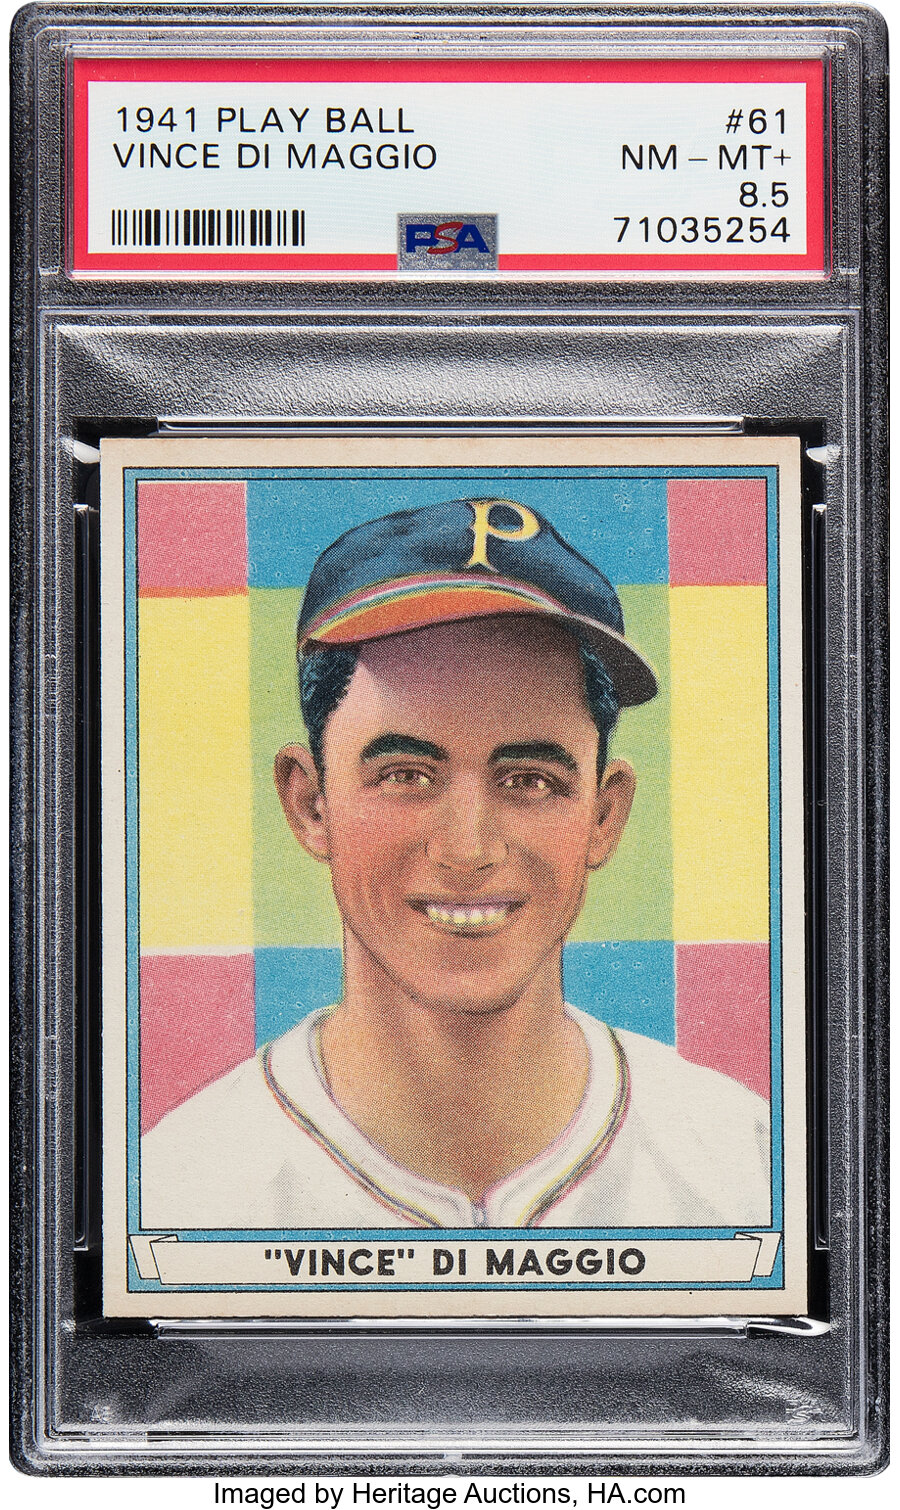 1941 Play Ball Vince DiMaggio Rookie #61 PSA NM-MT+ 8.5 - Pop Two, Two Higher